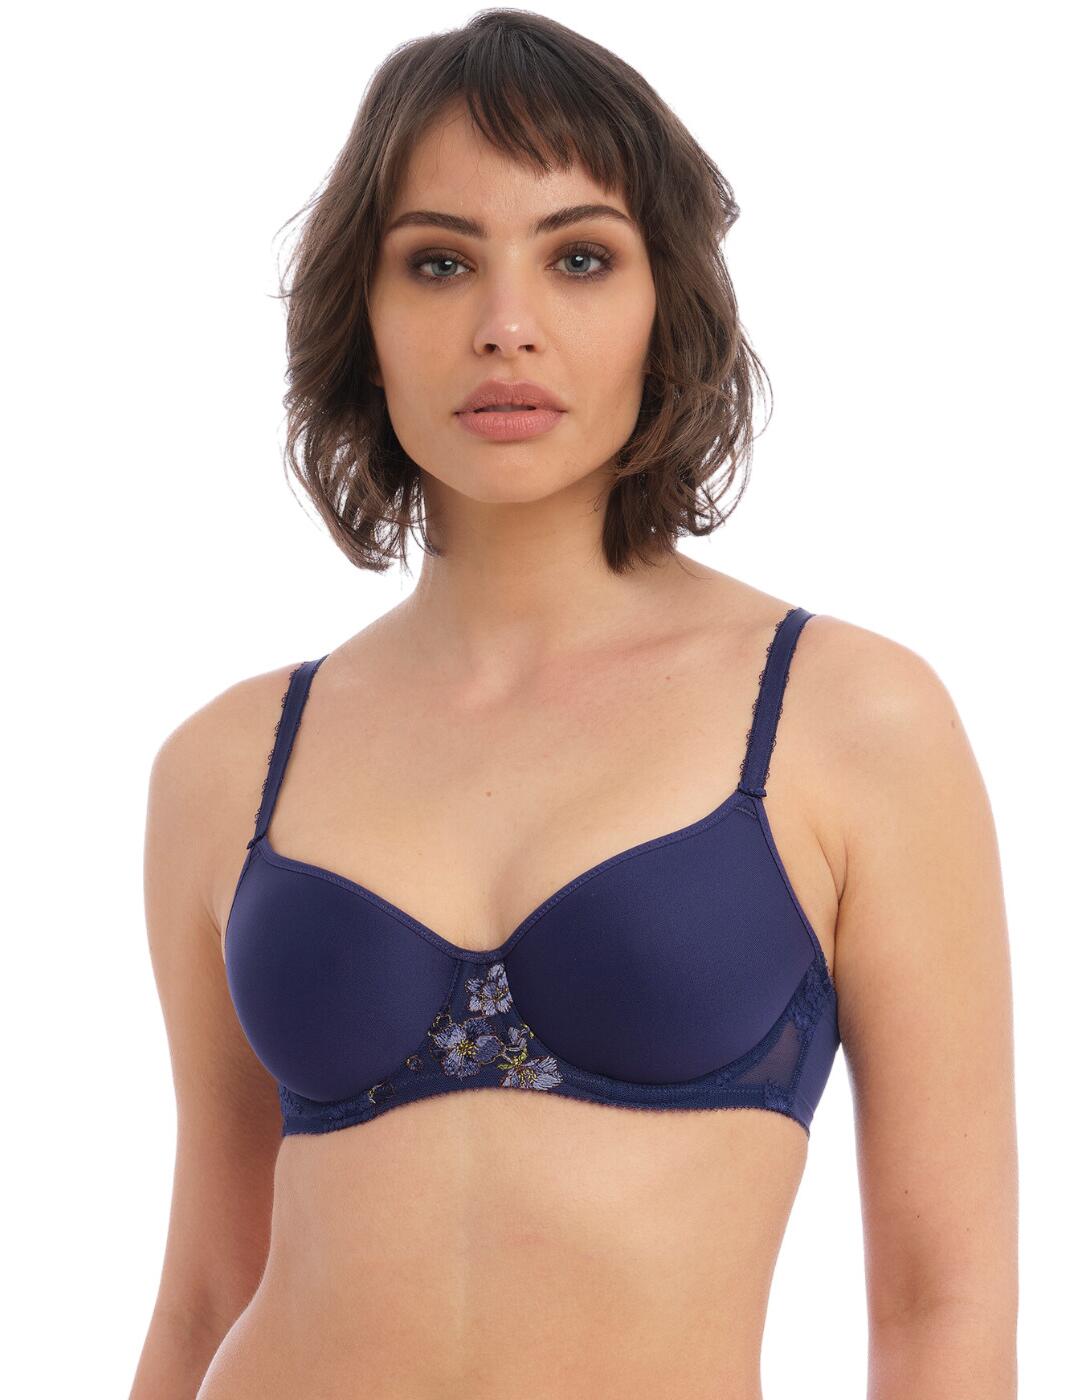 Up To 68% Off on Women's Floral Lace Bralette